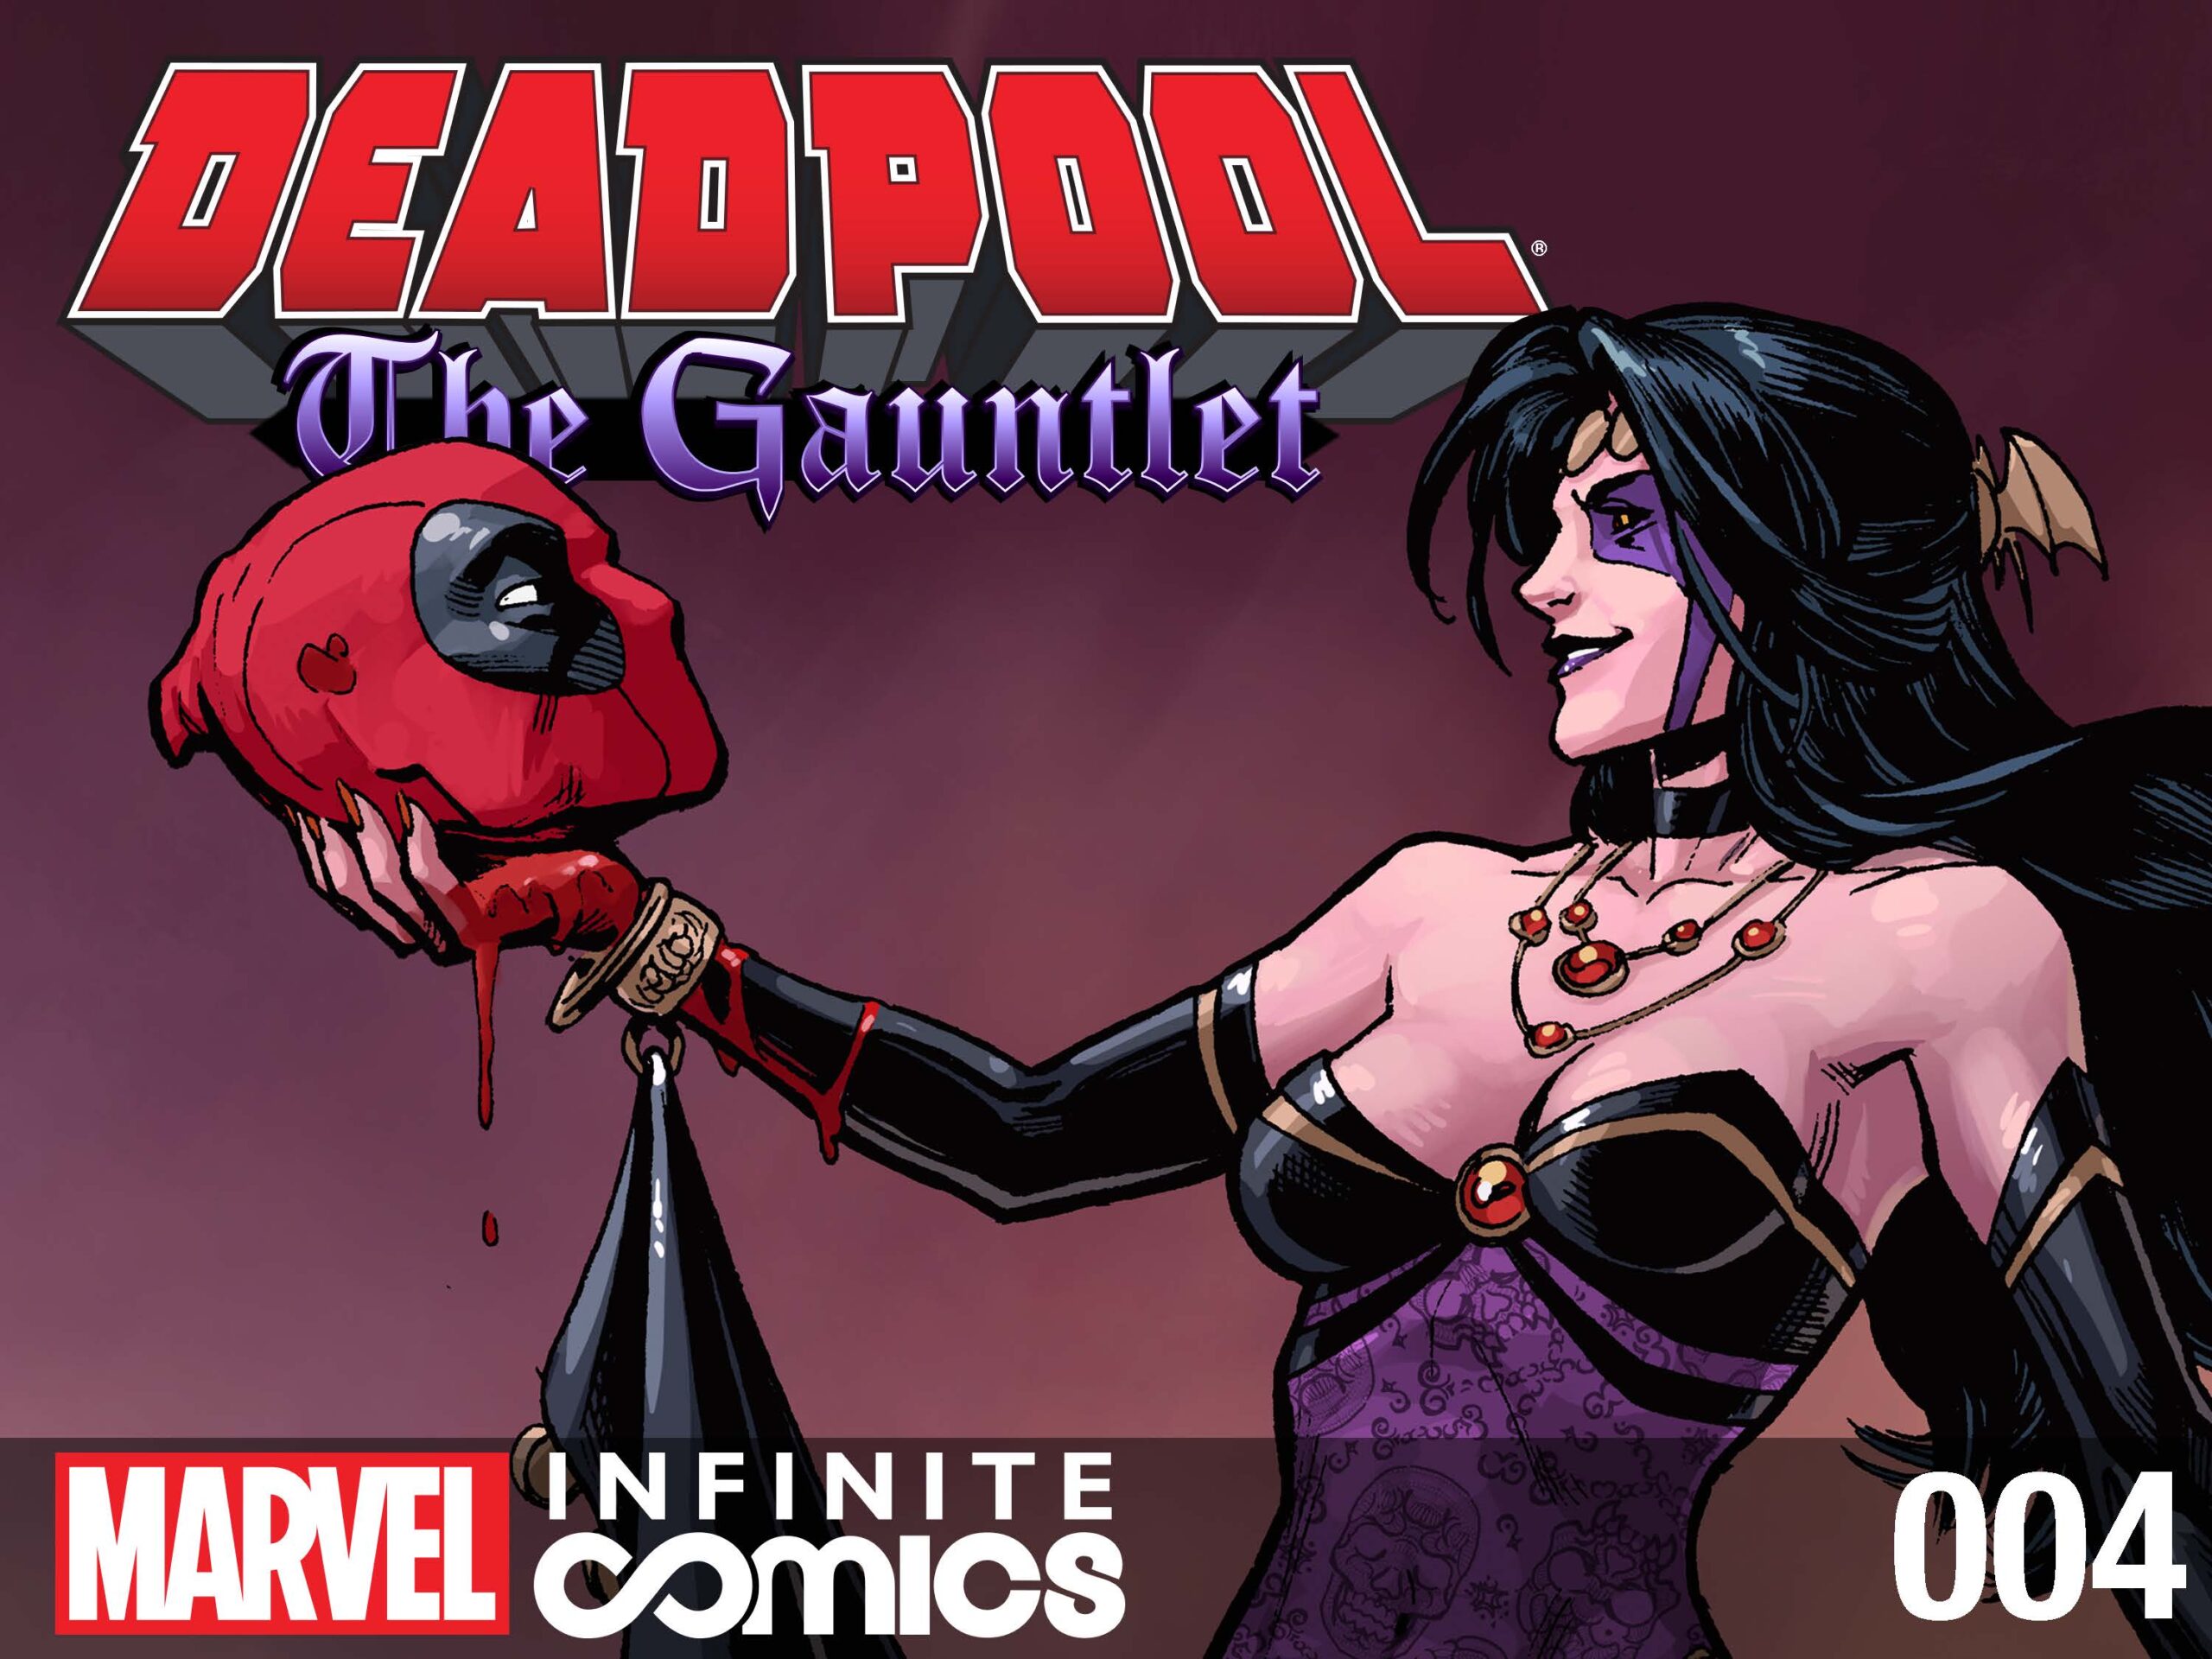 Here comes the bride! DEADPOOL: THE GAUNTLET #4 released today on INFINITE COMICS